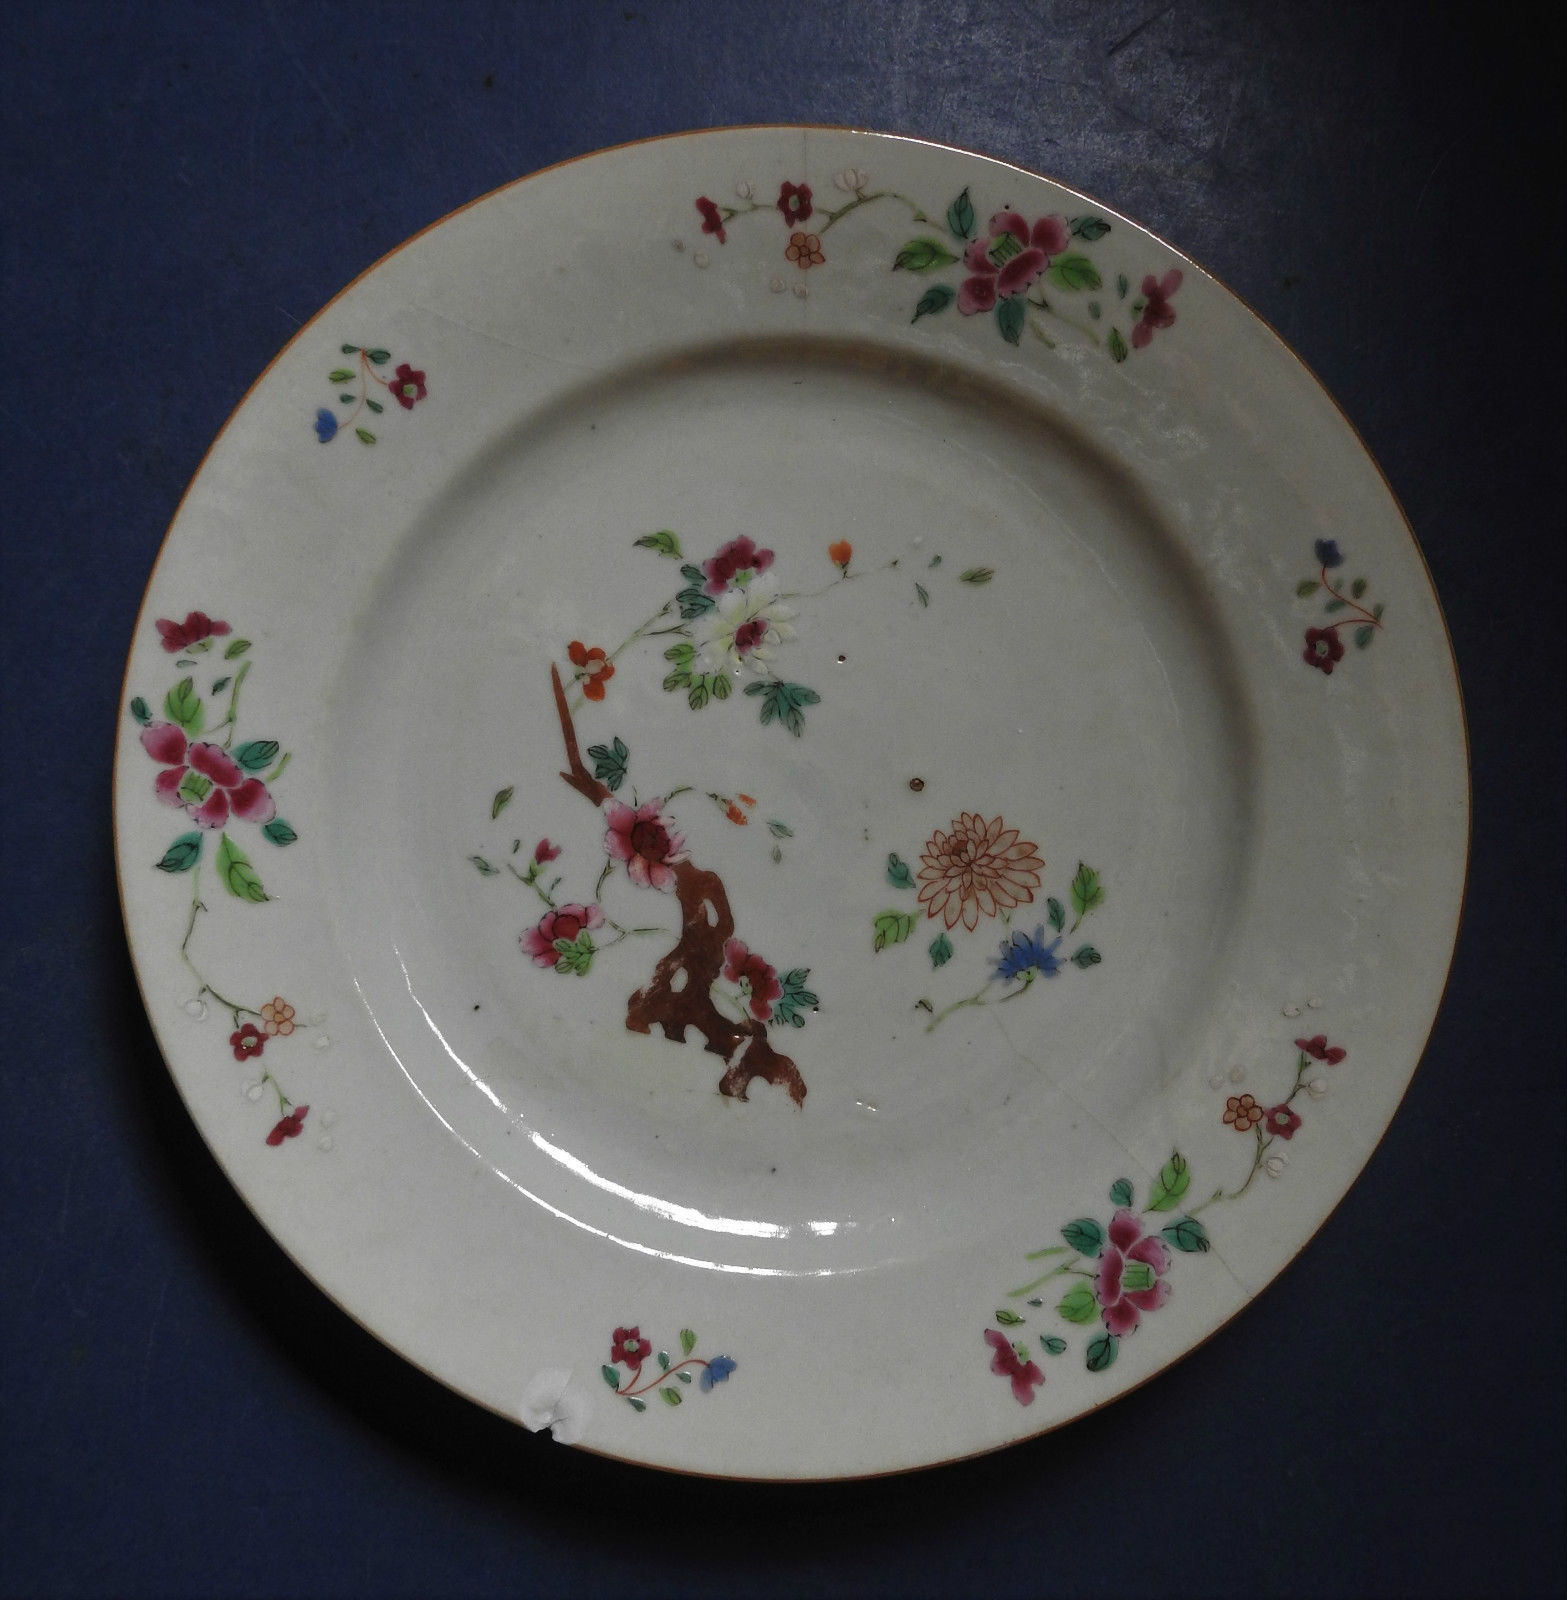 CHINESE PORCELAIN FAMILLE ROSE PLATE - QIANLONG PERIOD - 18TH CENTURY